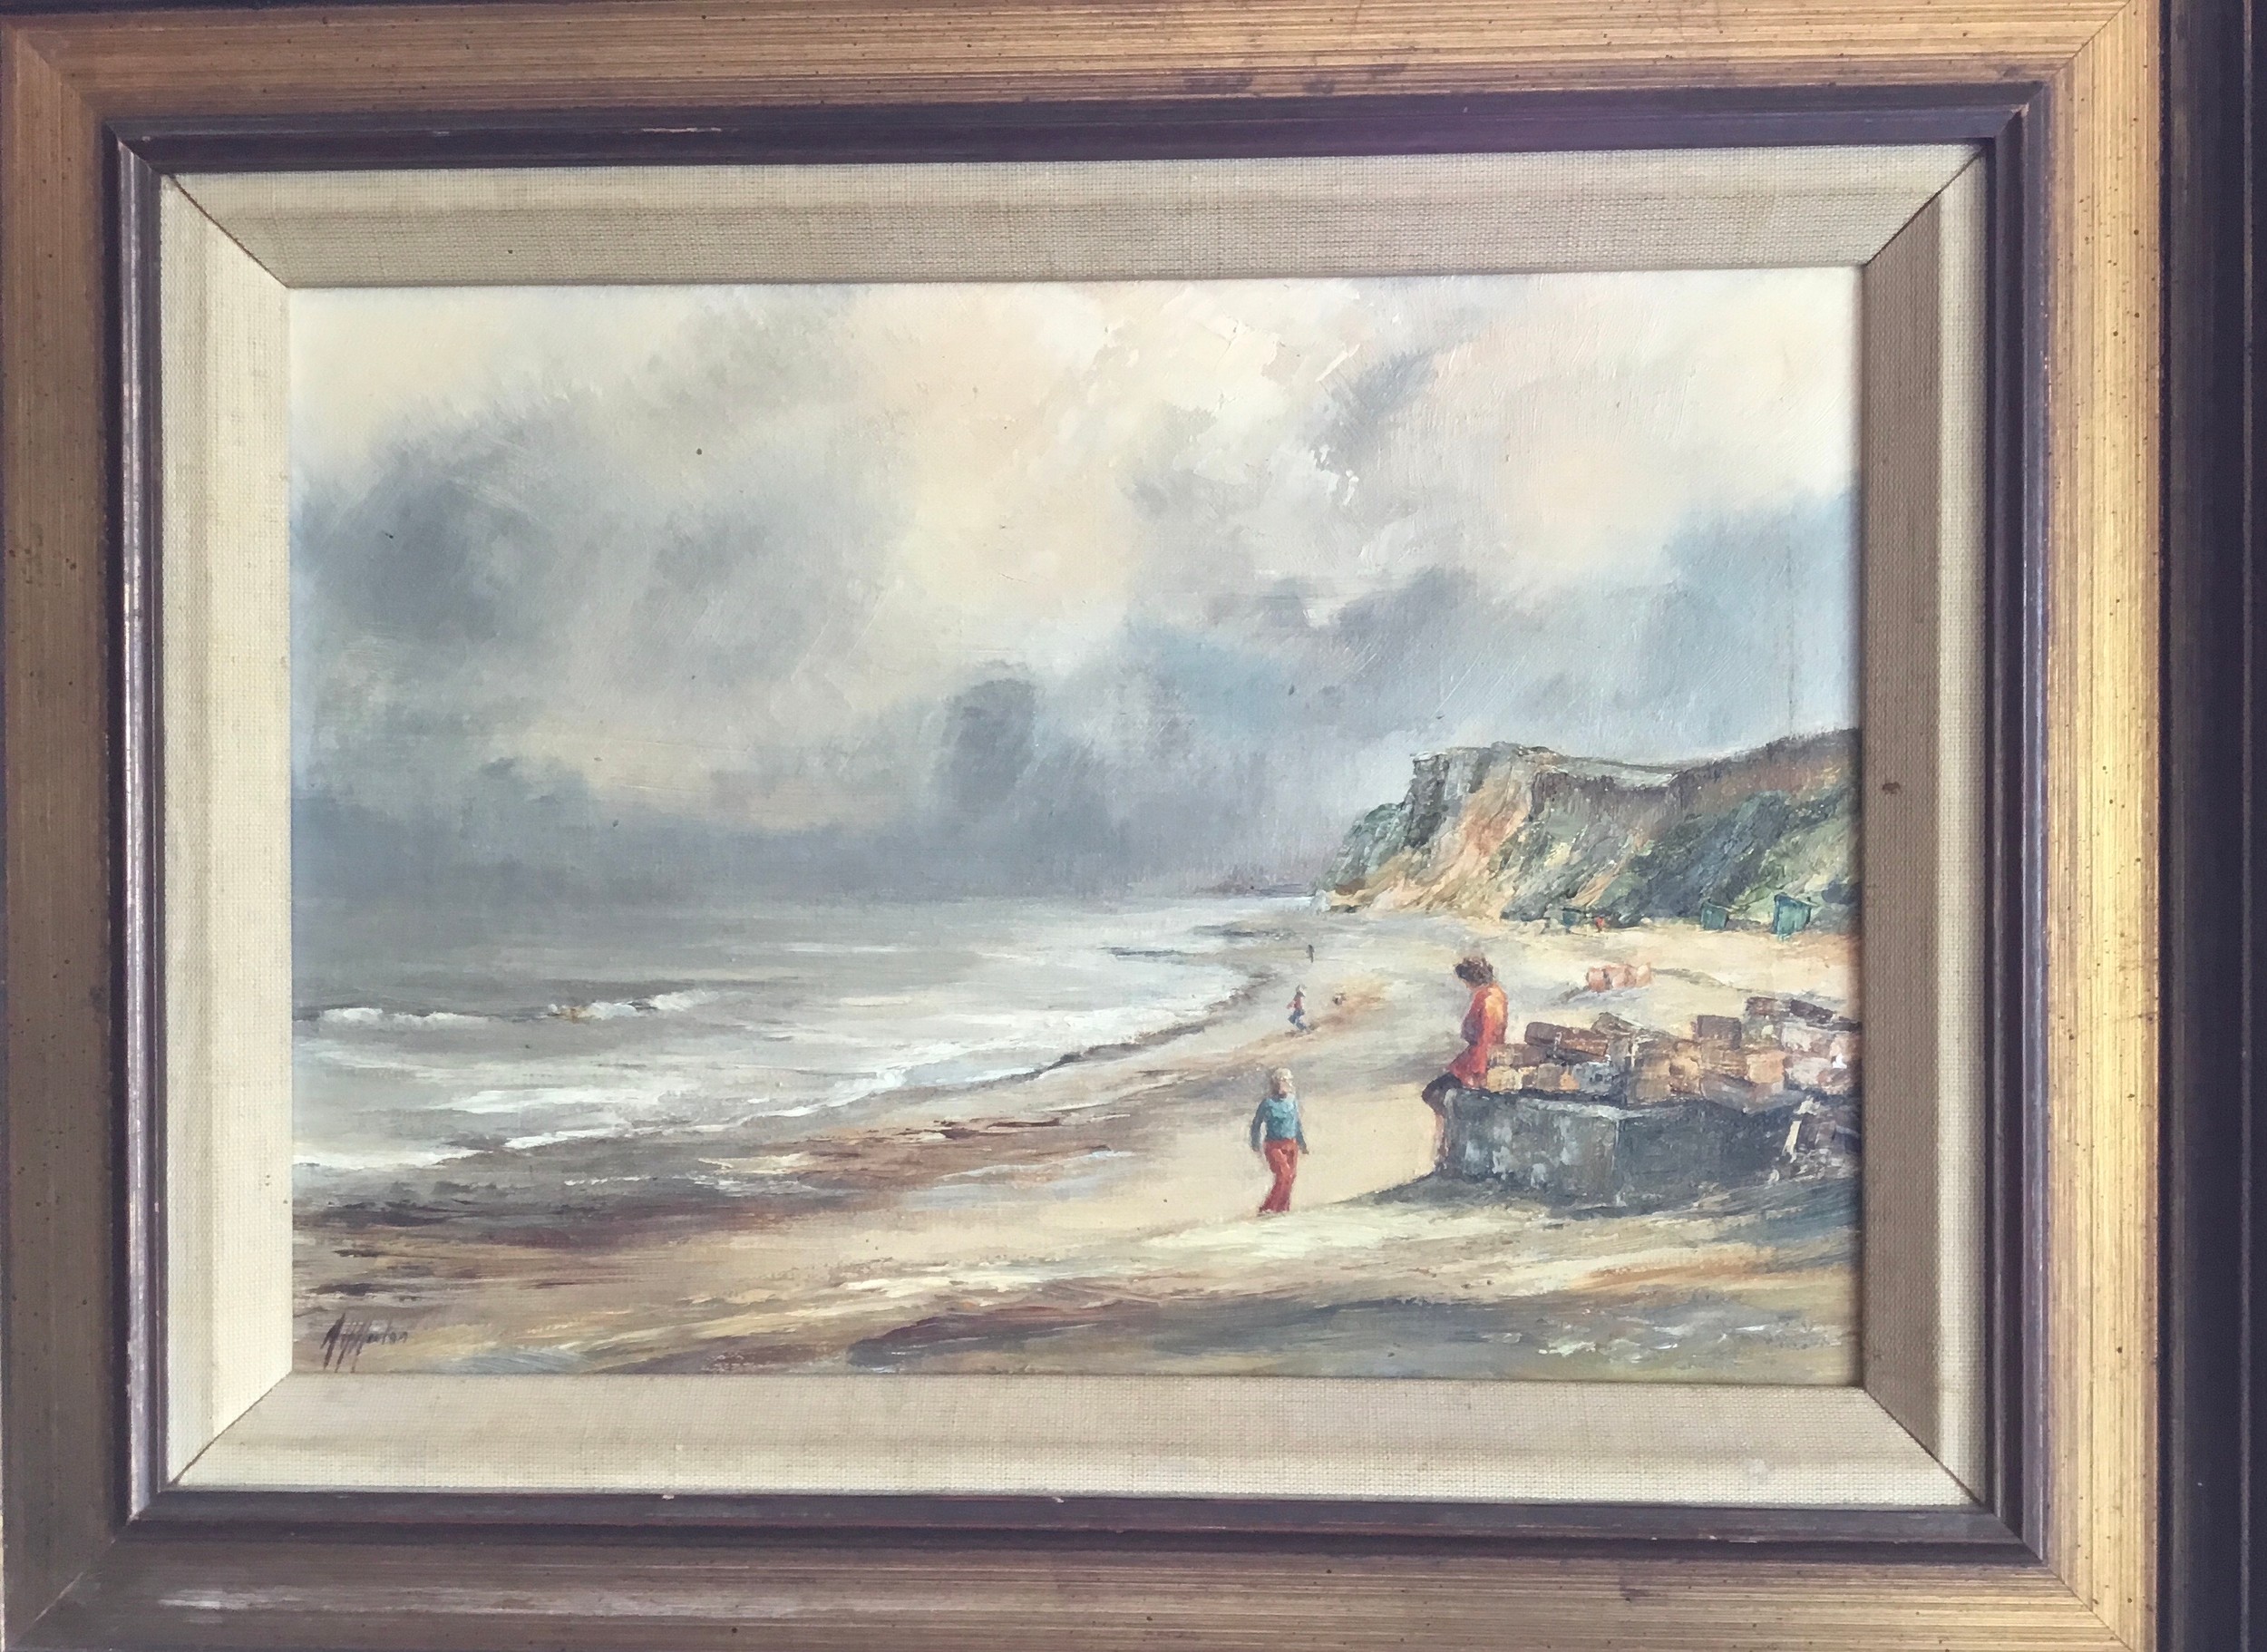 Maureen Norton (20th Century), Sun, Wing and Sand at Runton, signed, label to verso, oil on